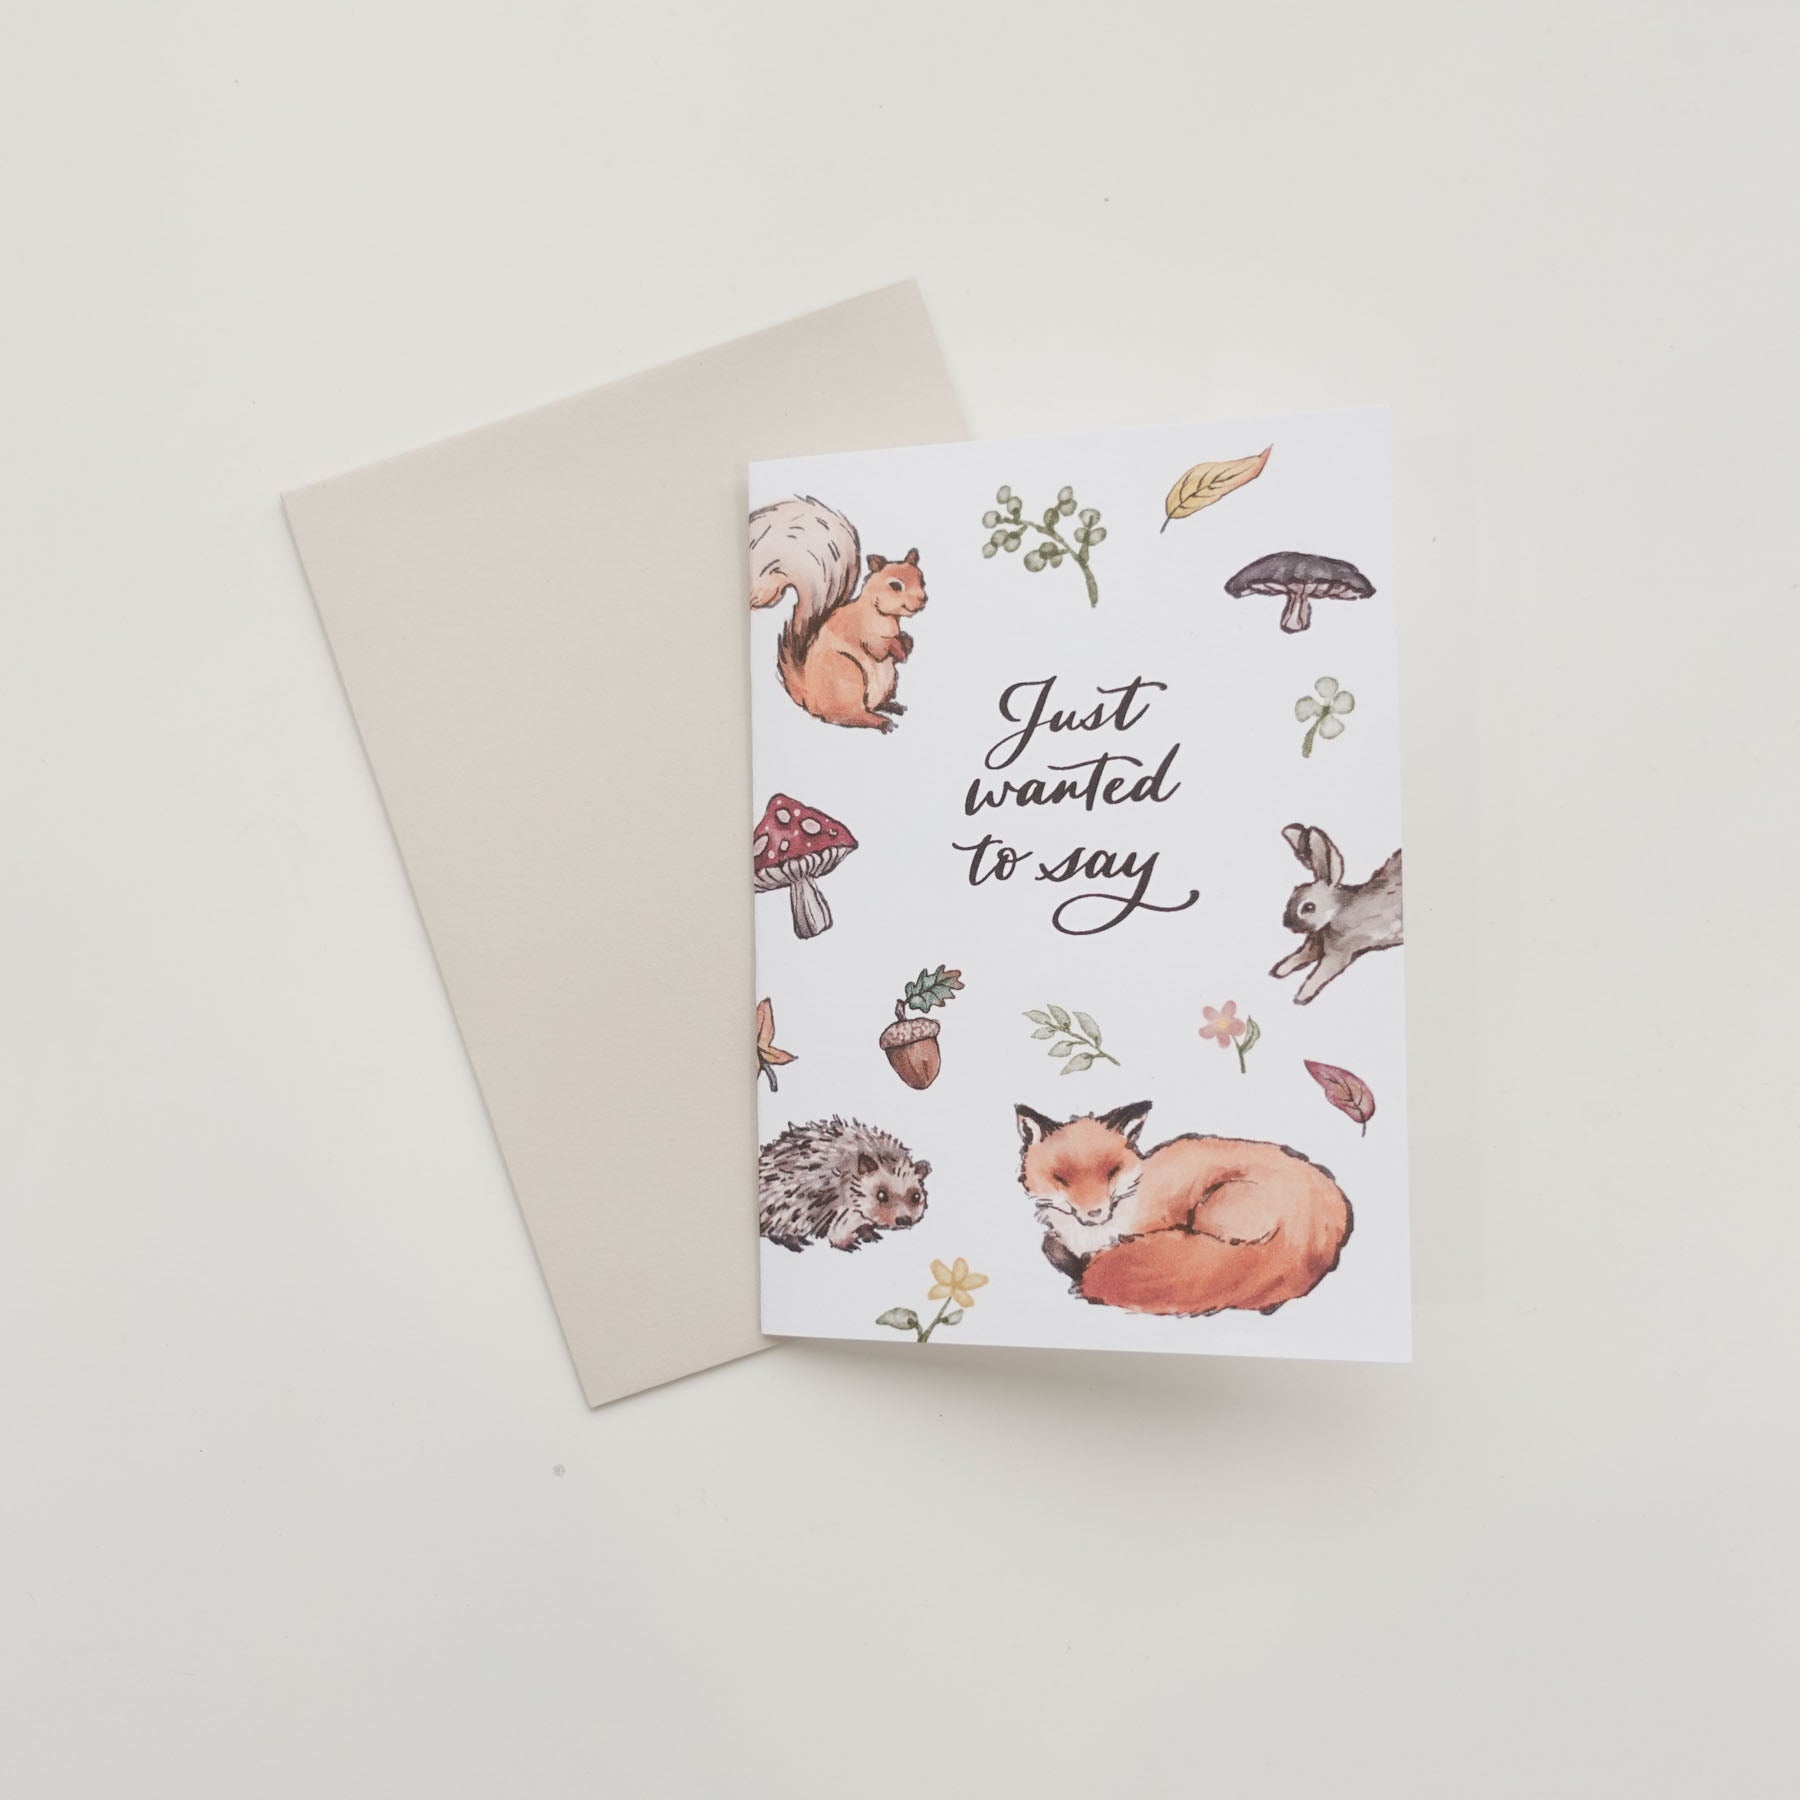 'Just wanted to say' Woodland Greeting Card